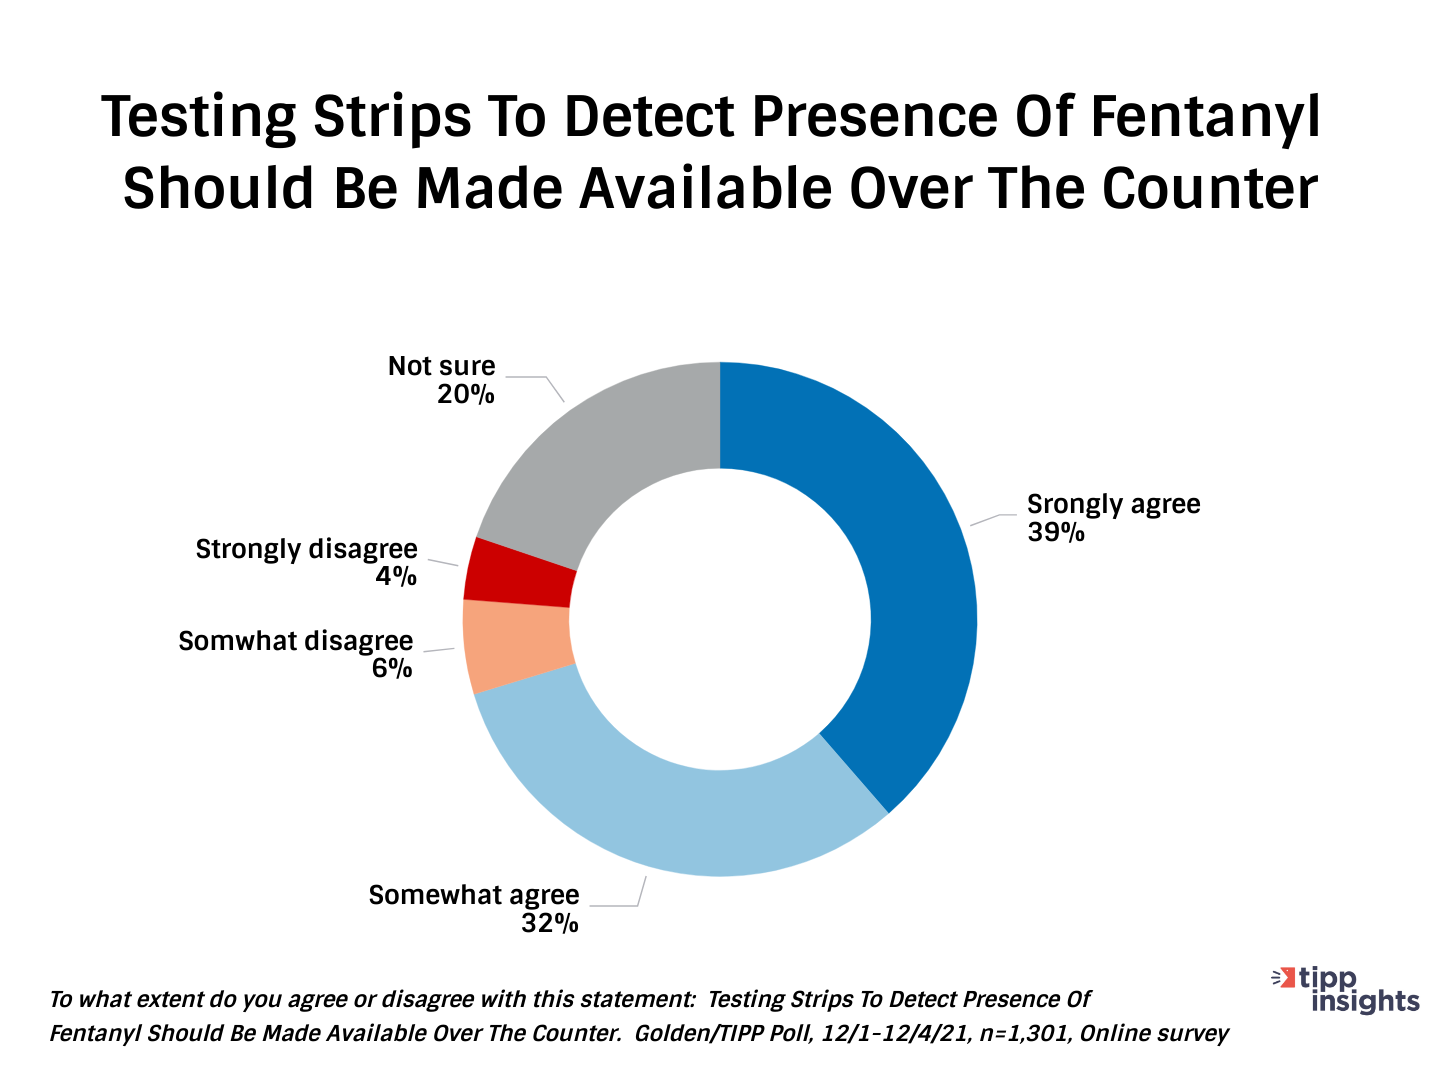 Golden/TIPP Poll results, Testing Strips to detect presence of Fentanyl should be made available OTC